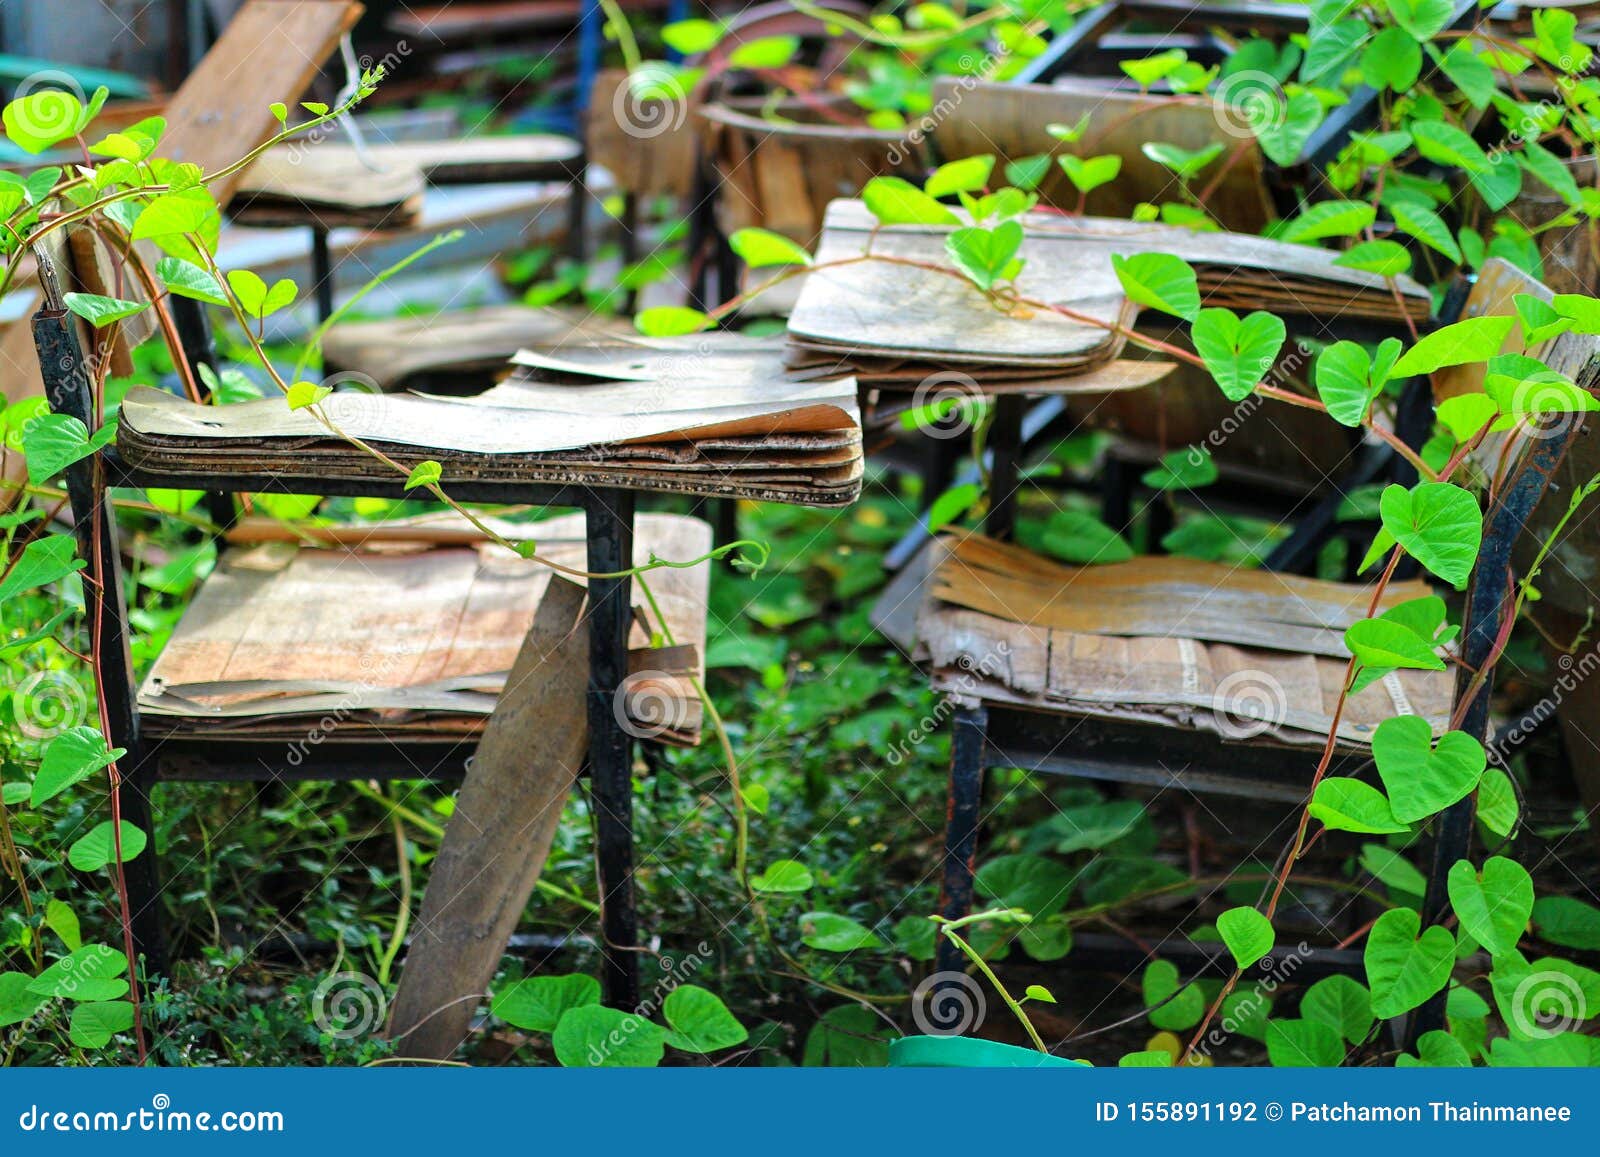 The Old Wooden Student Desk Is Worn Out And Placed Outdoors There